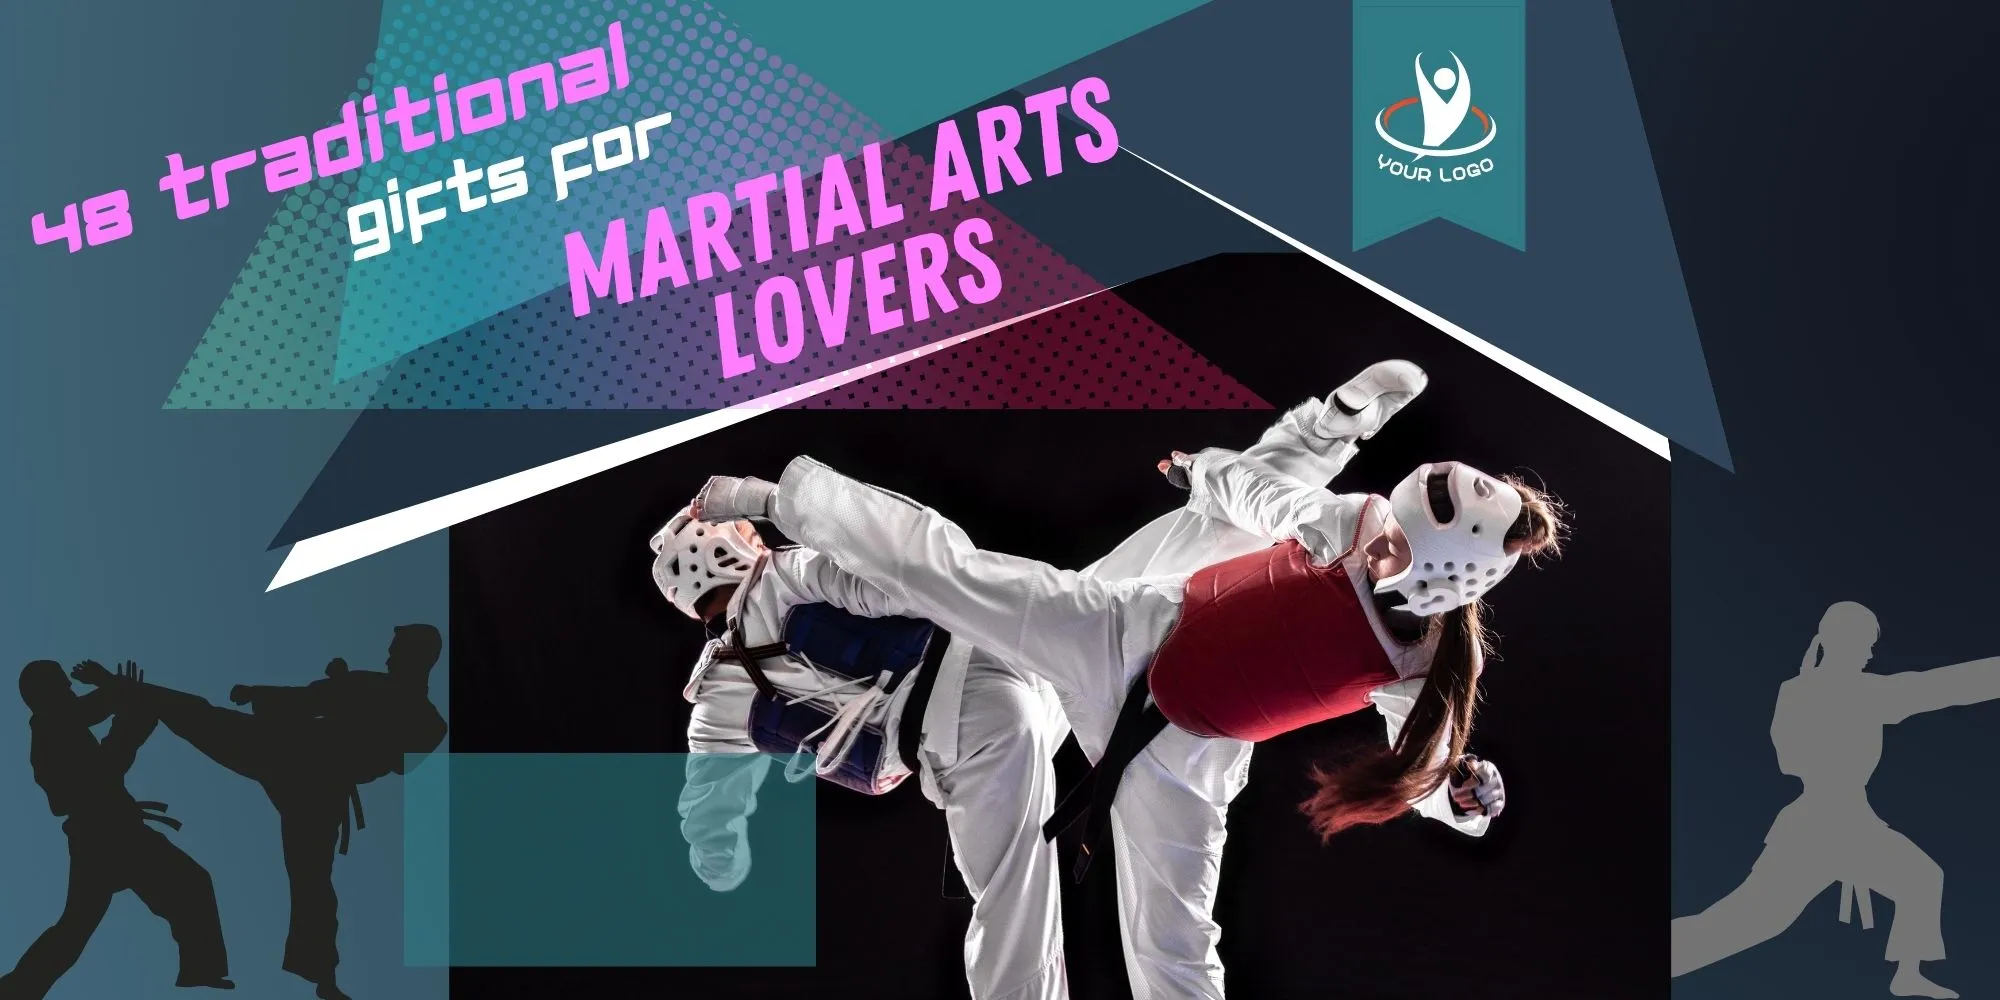 48-Traditional-Gifts-For-Martial-Arts-Lovers